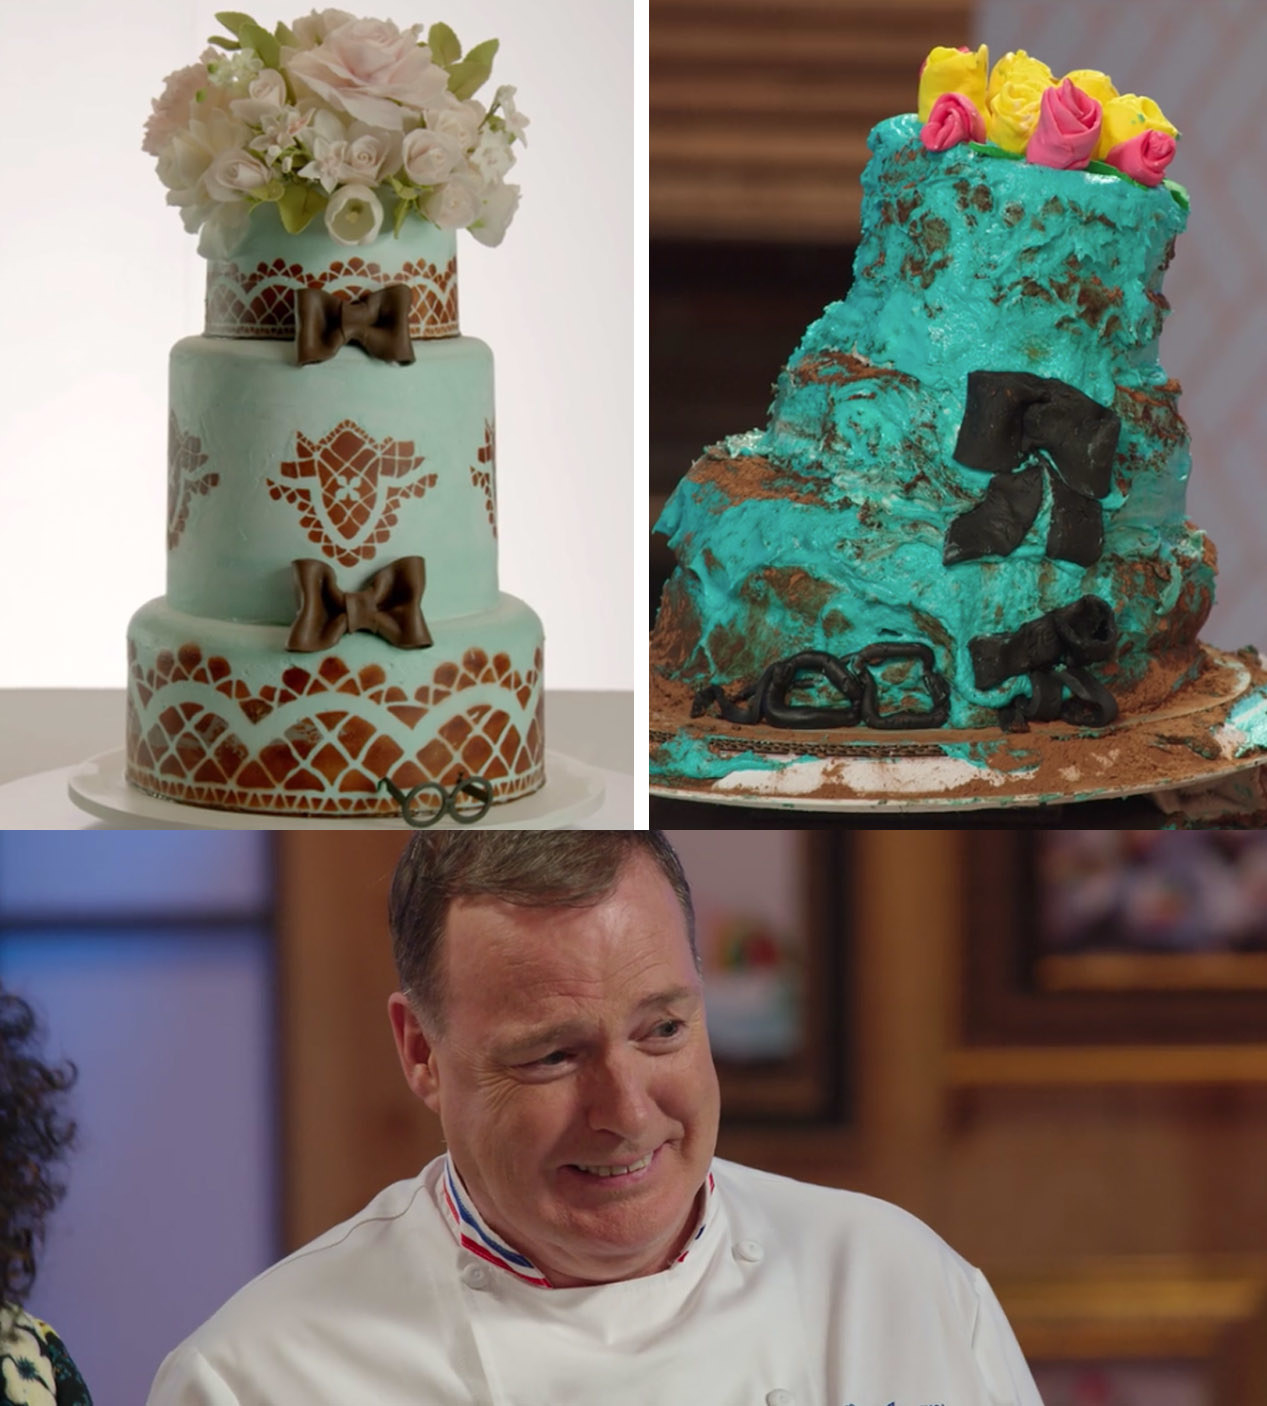 The Great British Baking Show': Every Season Ranked